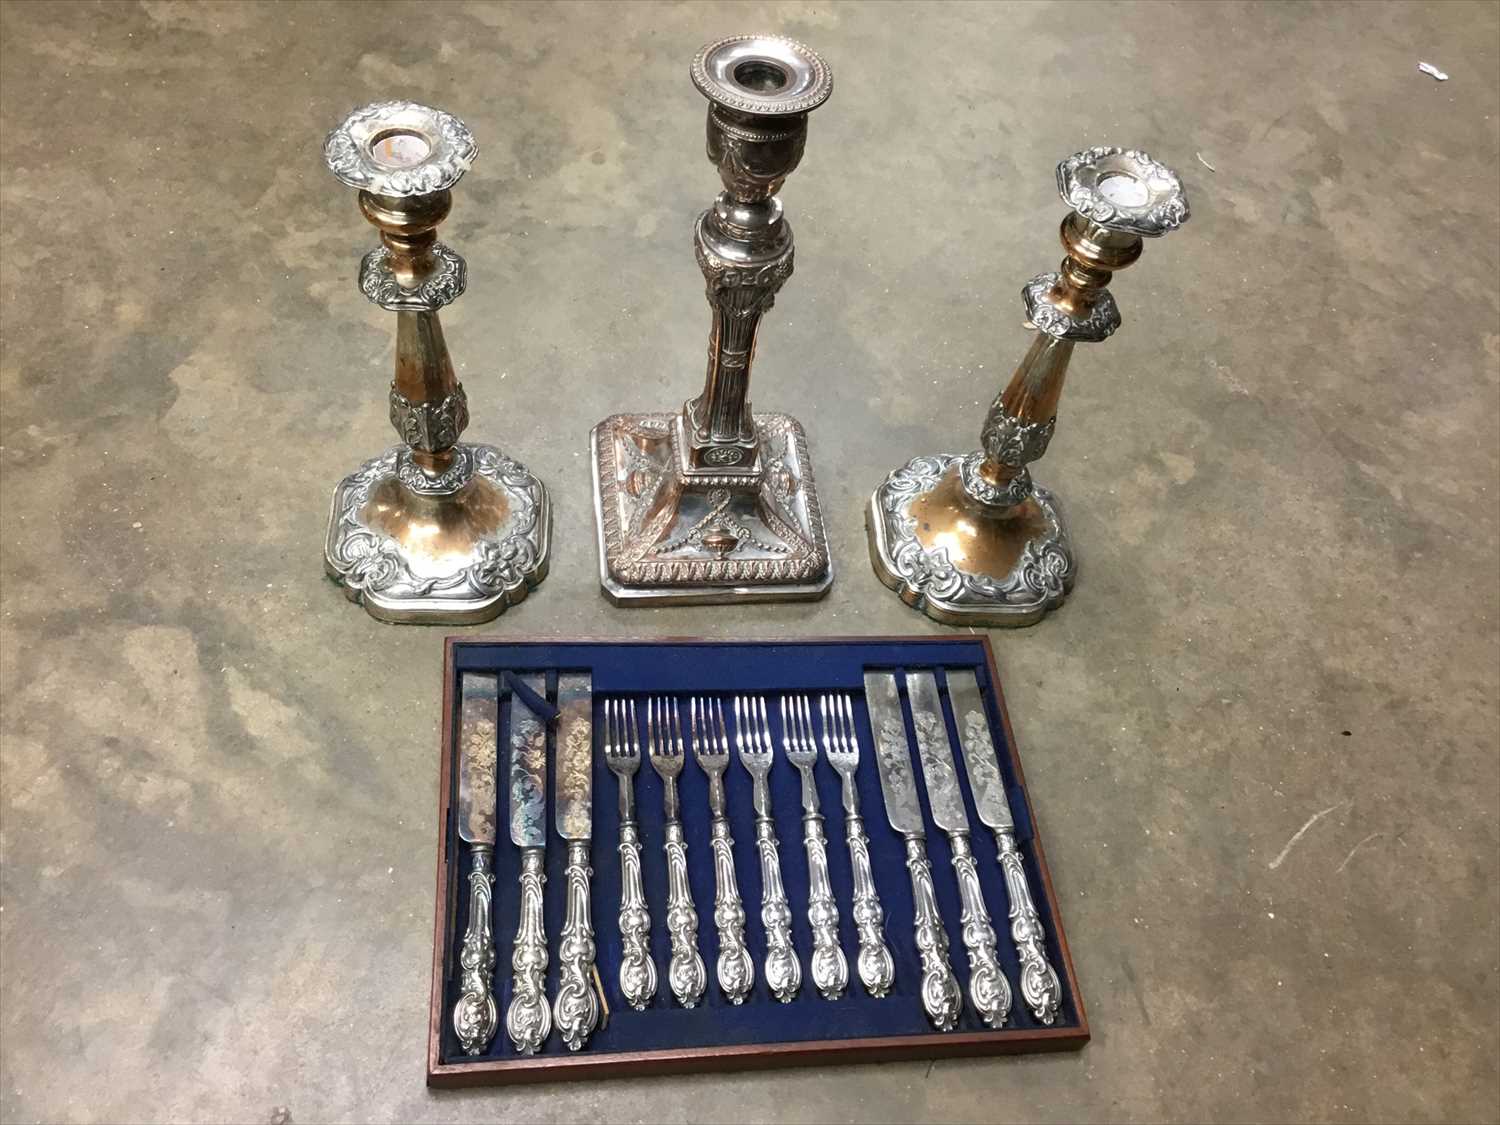 Lot 177 - Geogian Neo classical Old Sheffield Plate candlestick, two further candlesticks and set of silver handled fruit knives and forks